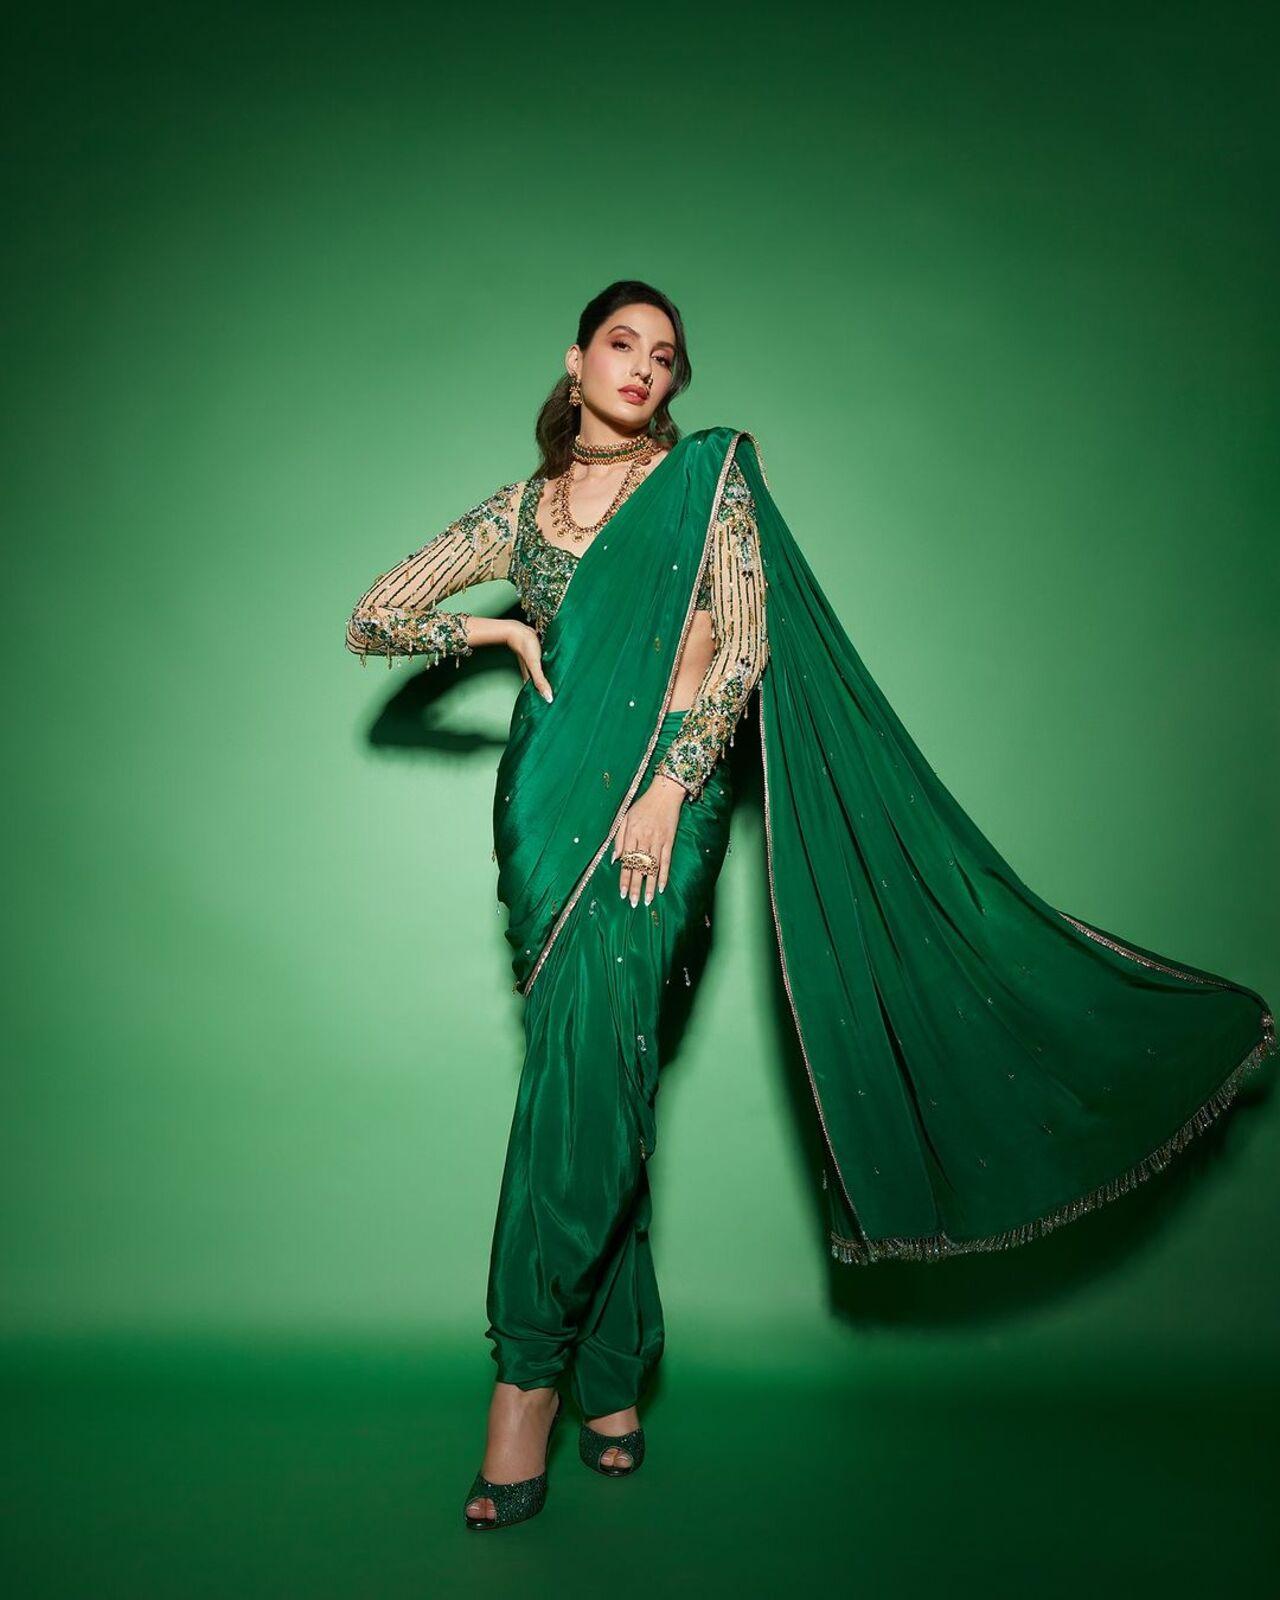 The beautiful Nora Fatehi is wearing a custom Nauvari emerald green color saree fabricated in silk. With a stone work border paired with a tulle blouse the ensemble showcases the richness of the embellished stones and sequins